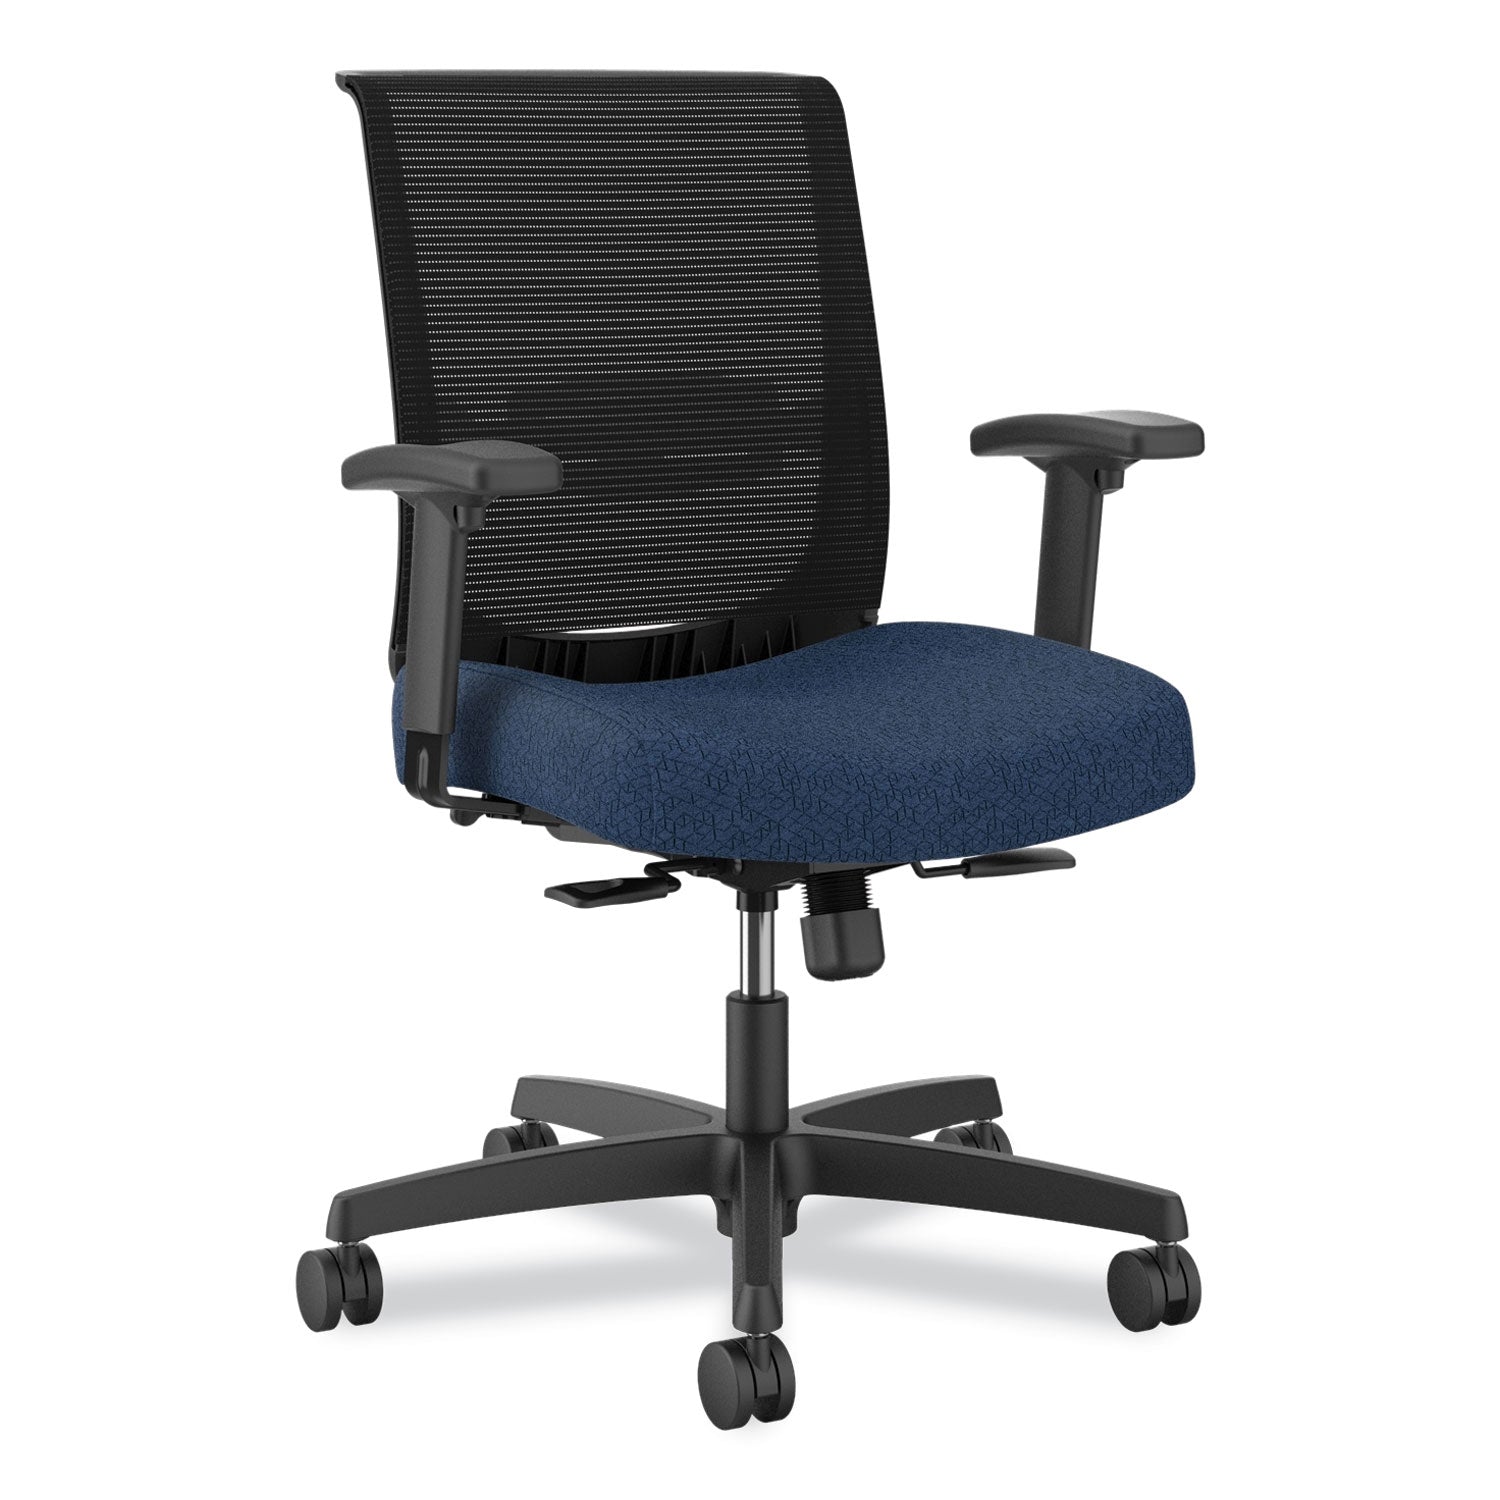 convergence-mid-back-task-chair-up-to-275lb-165-to-21-seat-ht-navy-seat-black-back-frame-ships-in-7-10-bus-days_honcmy1aapx13 - 1